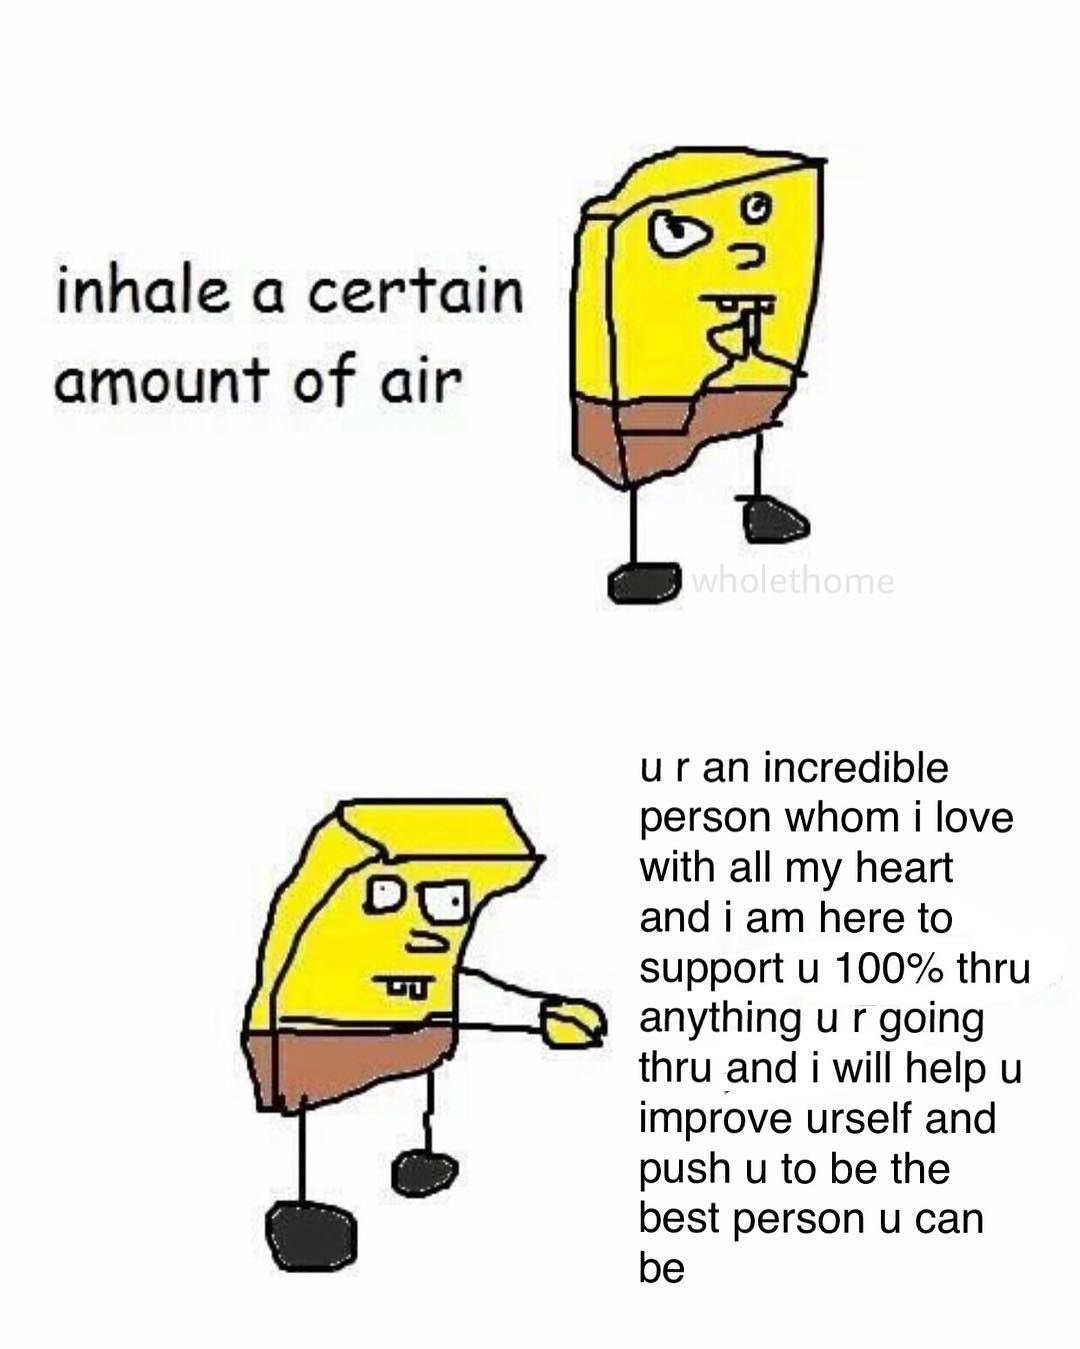 Wholesome meme with a poorly drawn Spongebob